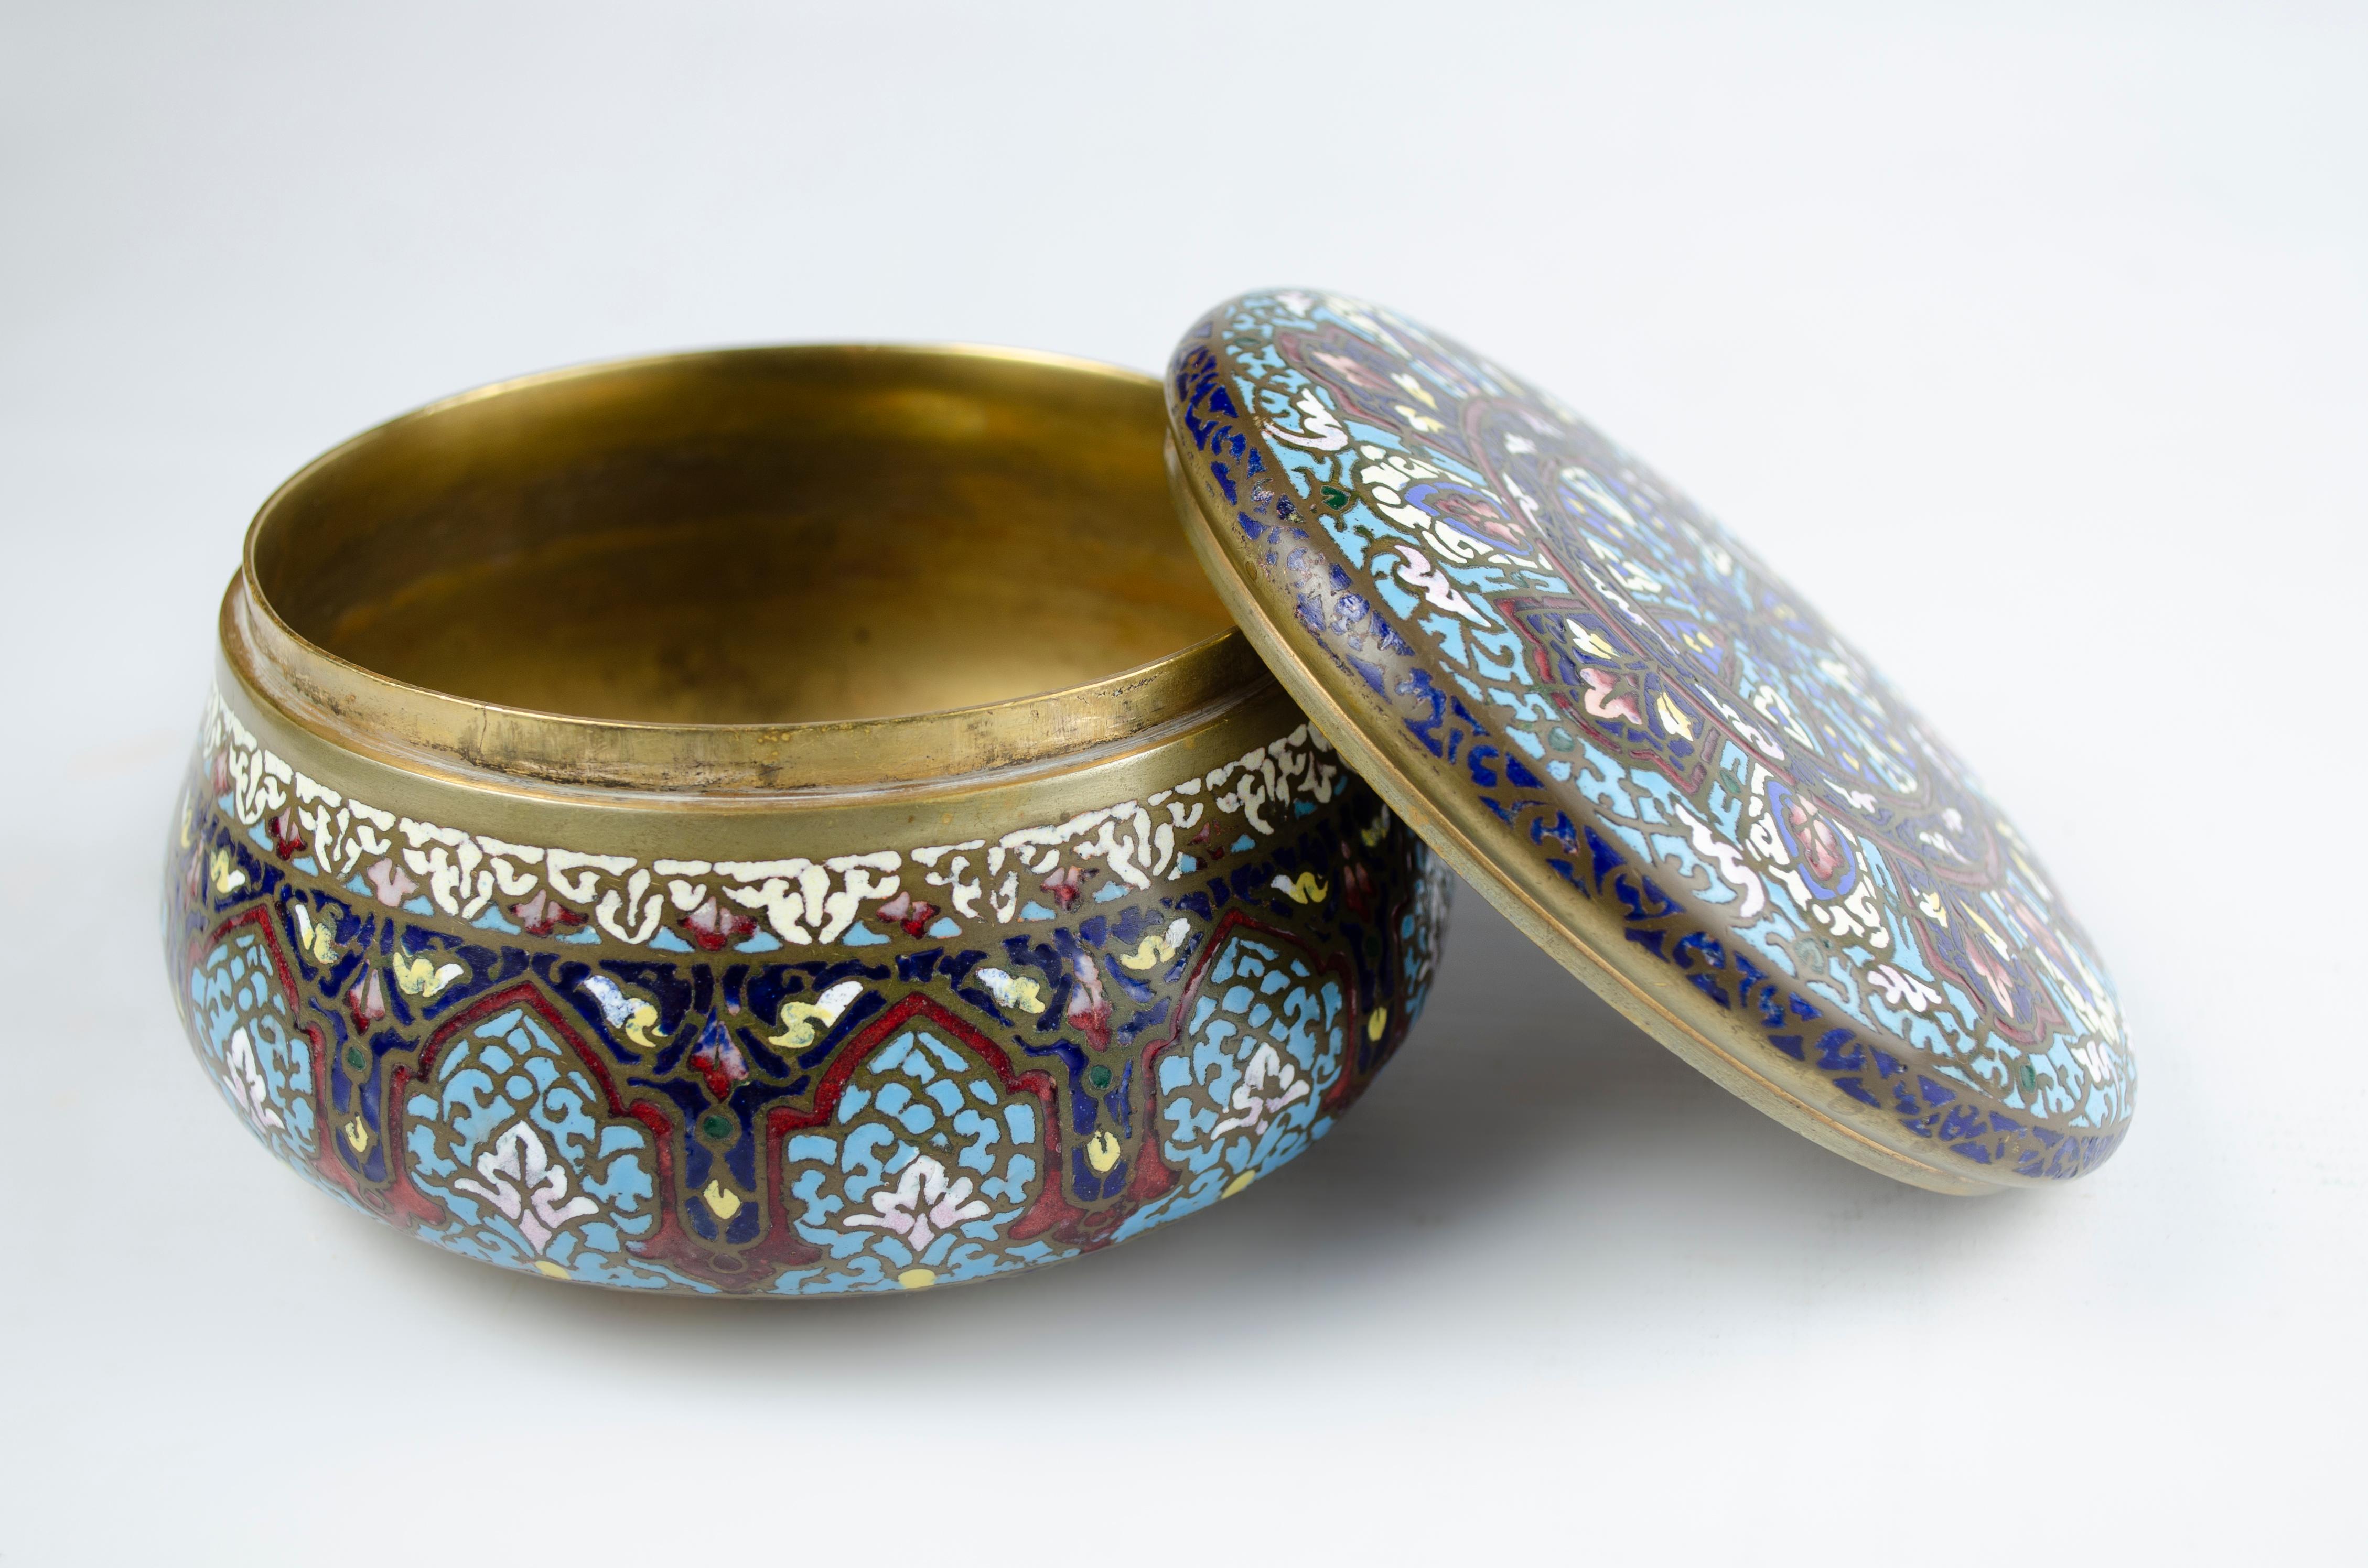 Napoleon III circular enamel box
Material bronze and Cloisonne enamel
Origin France Circa 1870
19th century
Excellent quality and excellent condition
Natural wear on its patina
Its interior is vermiel
The Napoleon III style had its heyday during the